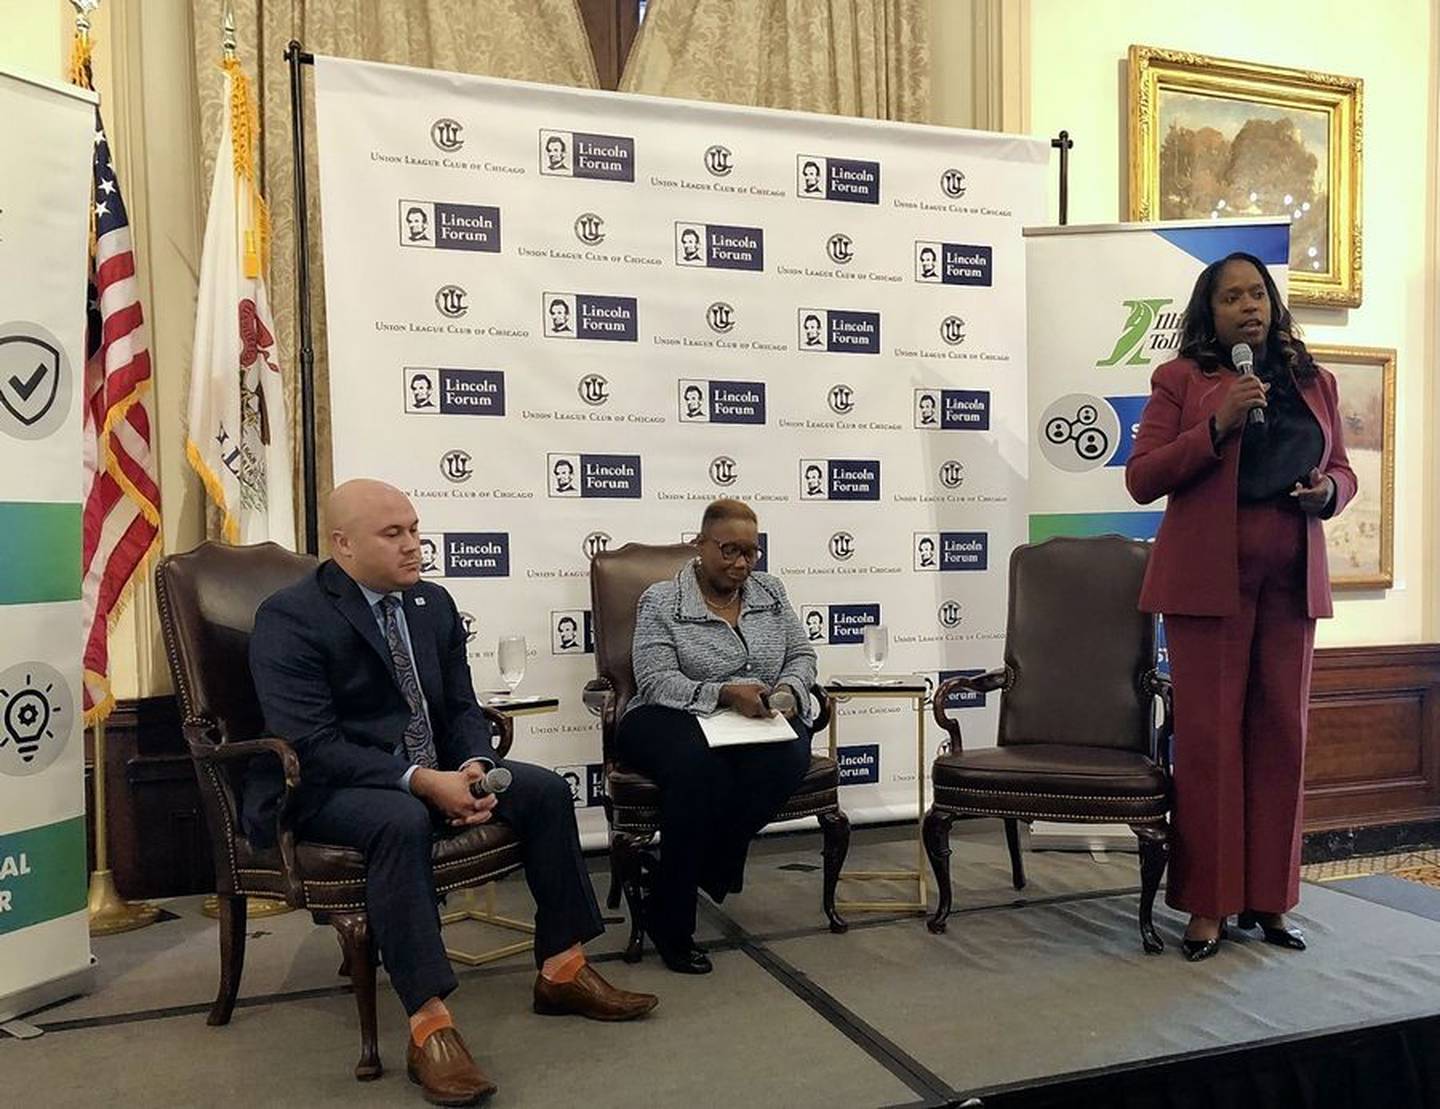 Illinois tollway Chairman Arnie Rivera, left, and Executive Director Cassaundra Rouse, right, discuss plans for a new capital program at a Lincoln Forum event moderated by Karen Freeman-Wilson, president of the Chicago Urban League.